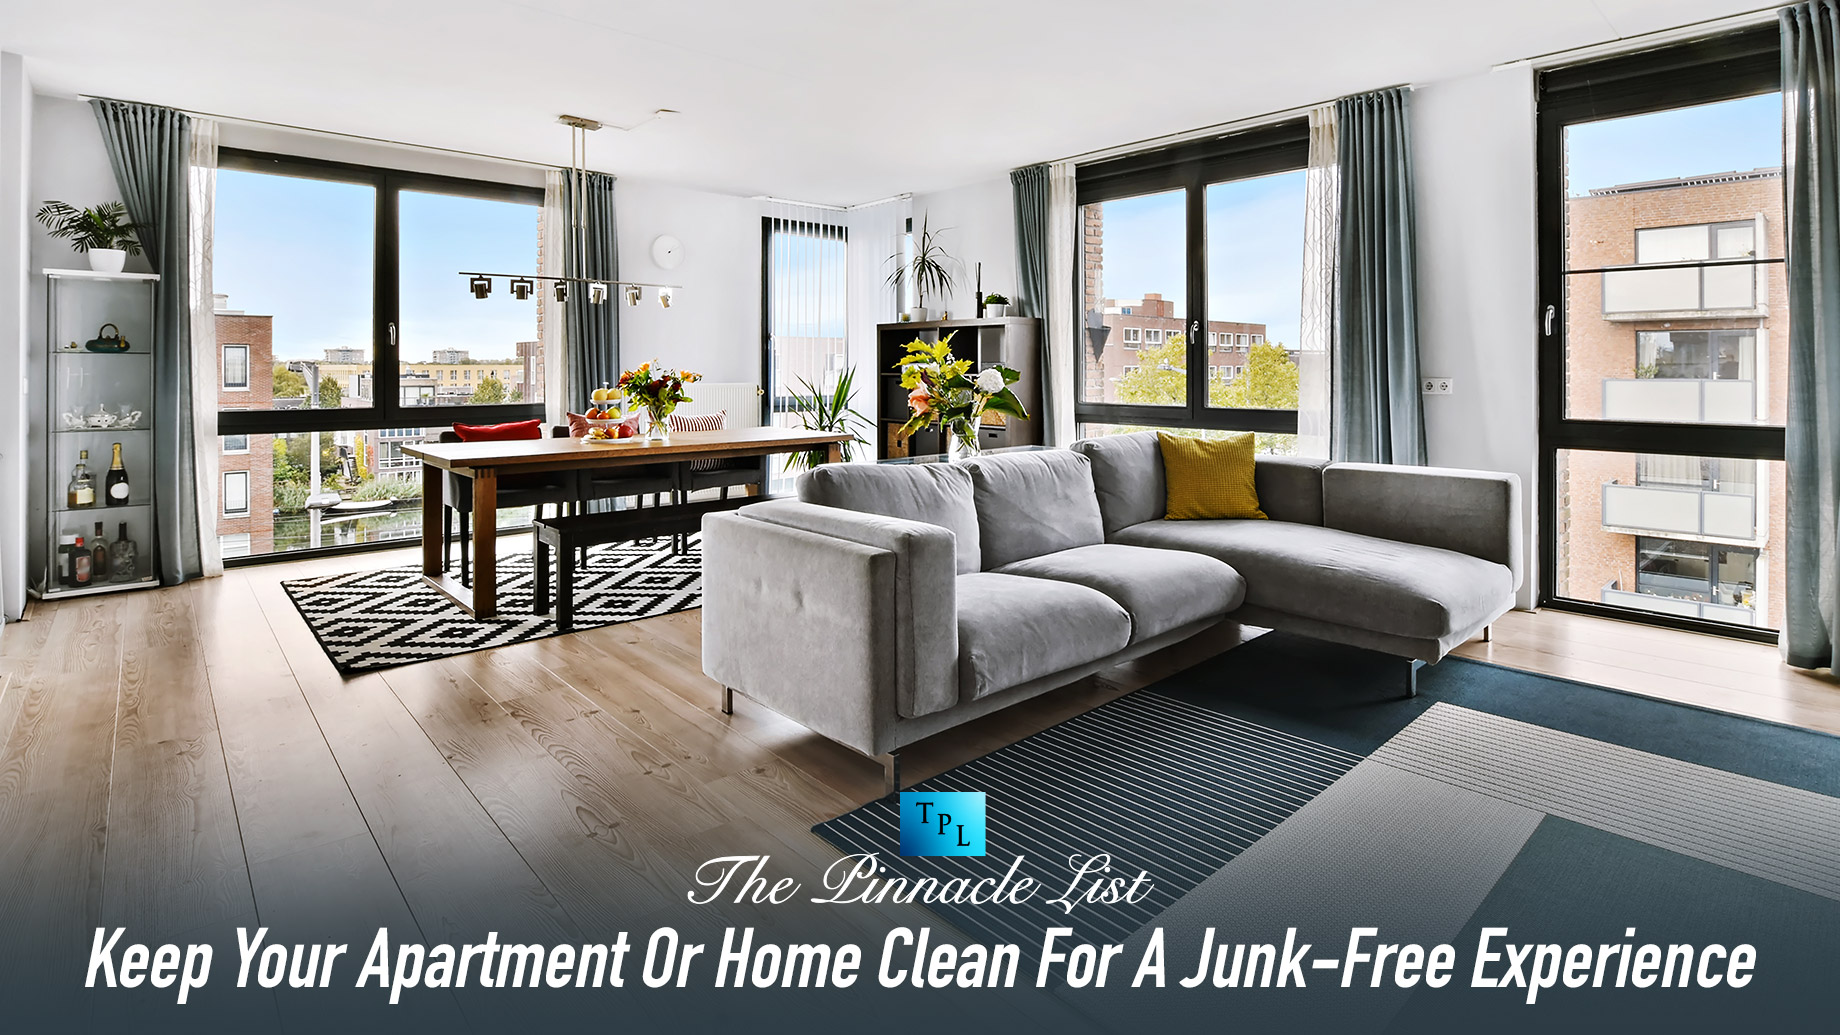 Keep Your Apartment Or Home Clean For A Junk-Free Experience